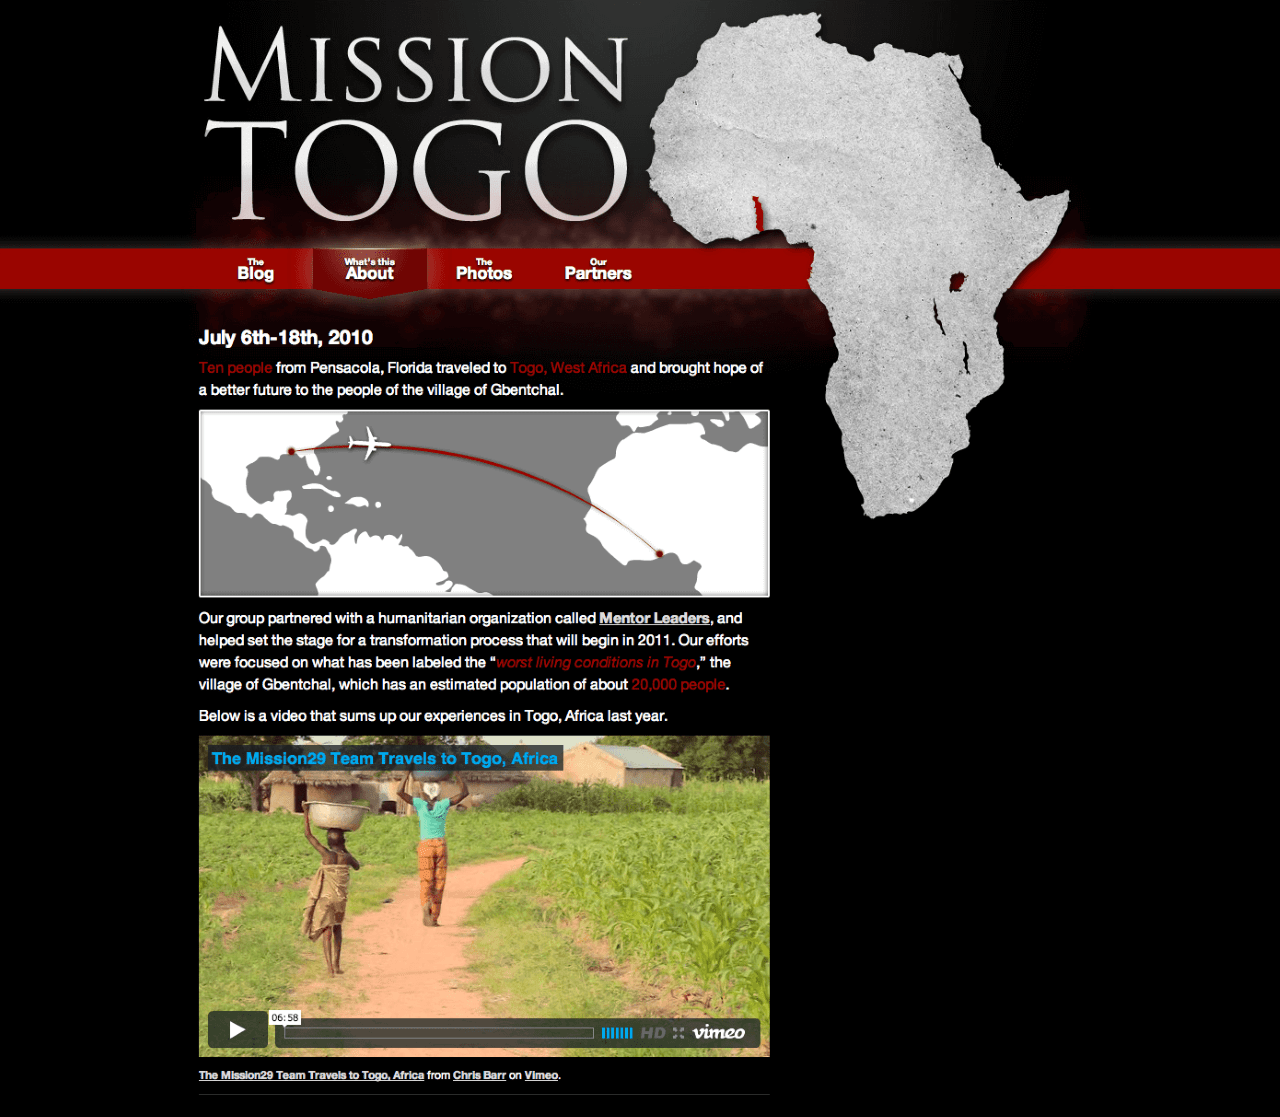 Mission Togo - About Page